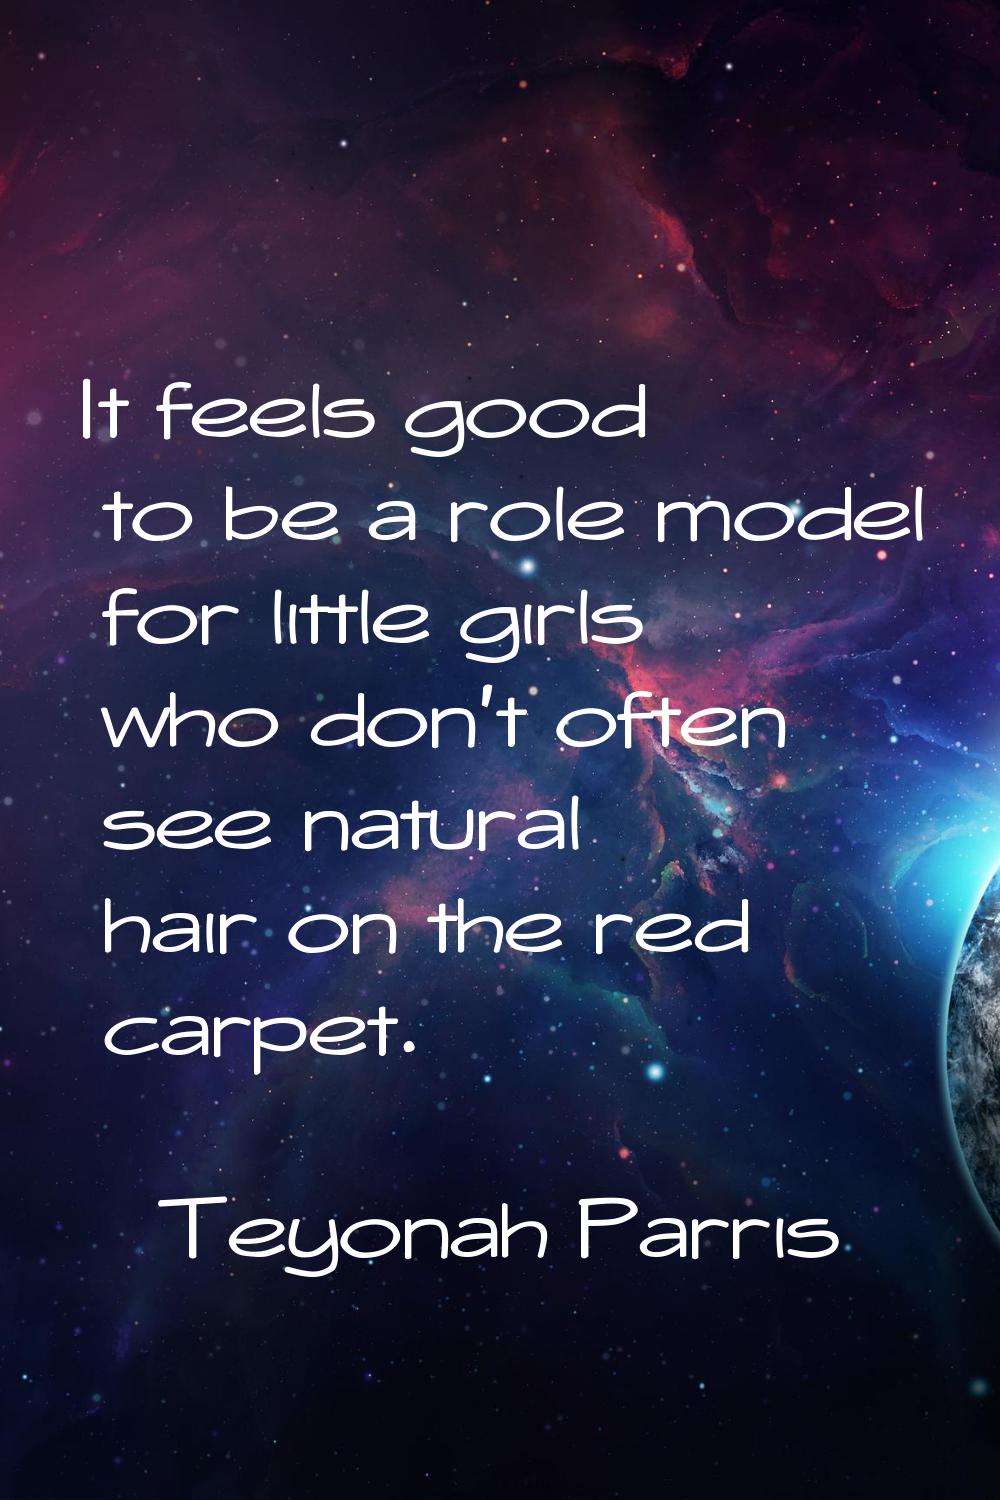 It feels good to be a role model for little girls who don't often see natural hair on the red carpe